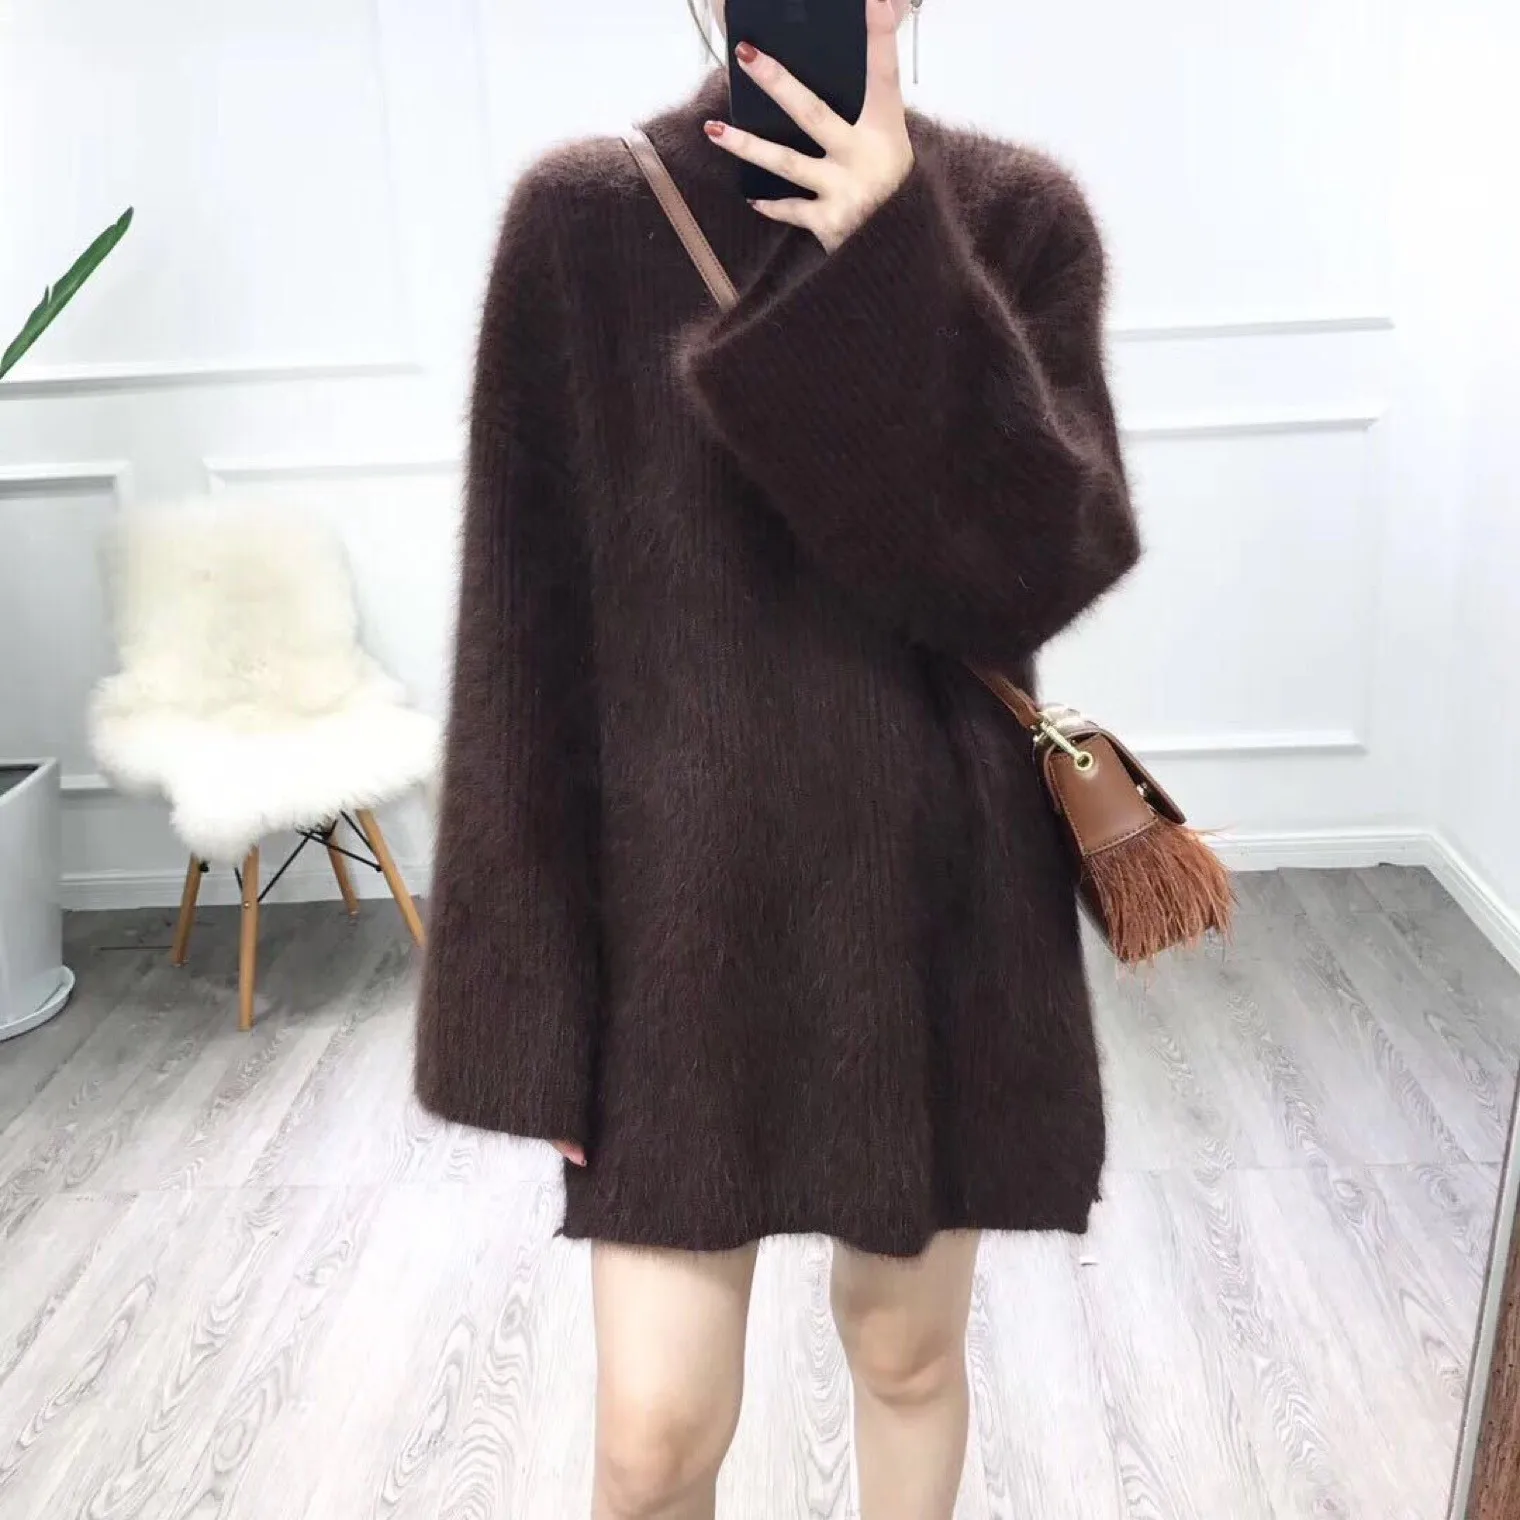 Autumn Winter Long Turtleneck Sweater Women Loose Lazy Oaf Flare Sleeve Fluffy Synthetic Mink Cashmere Knitted Jumpers | Женская одежда